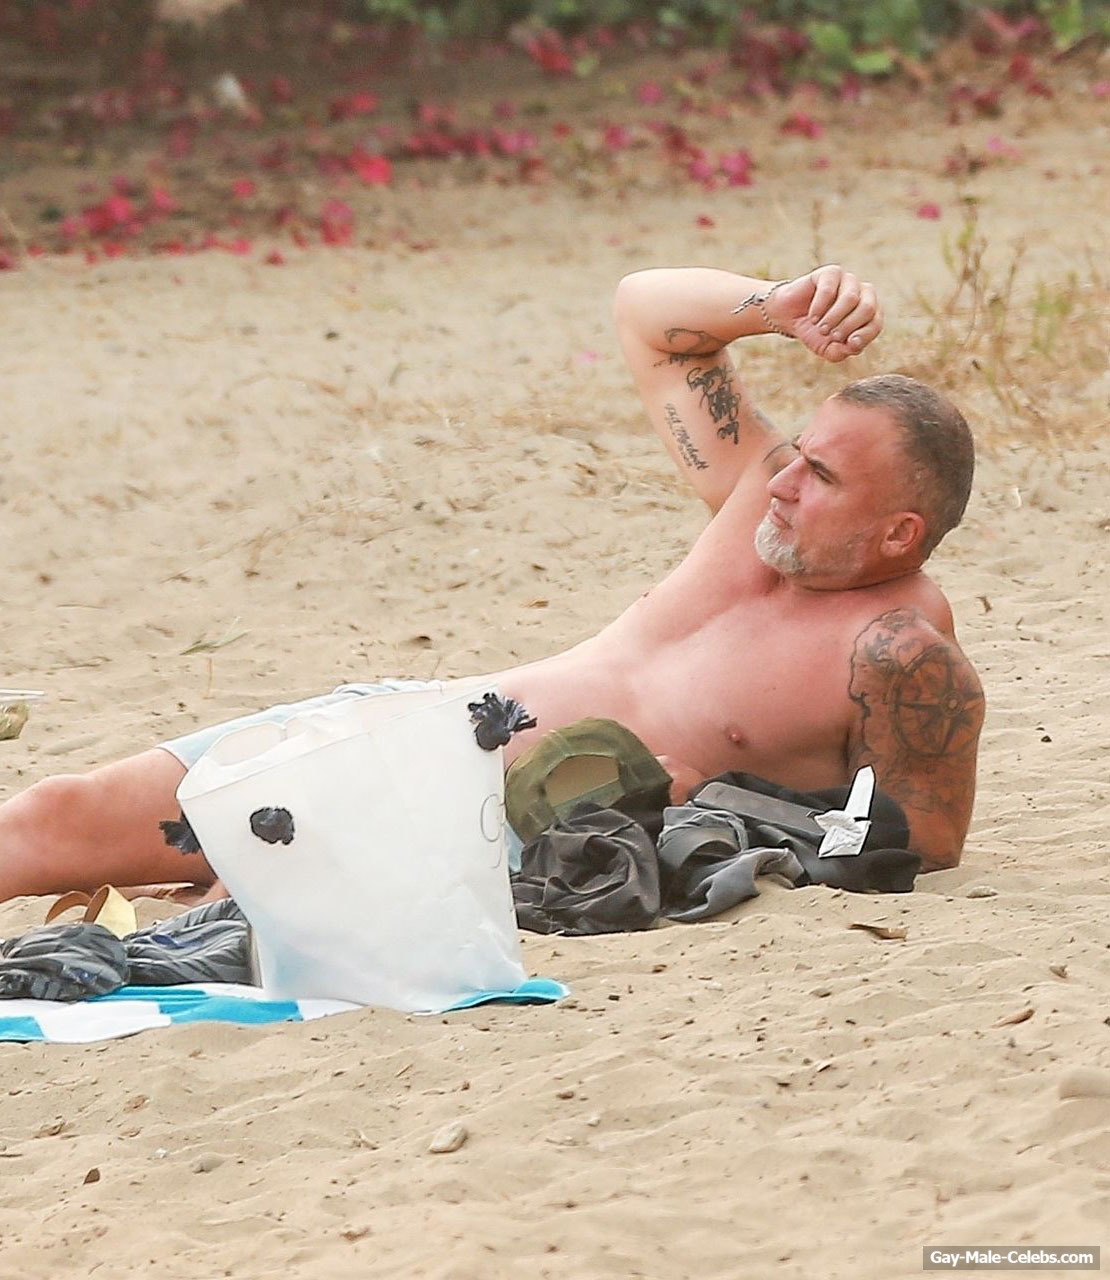 Dominic purcell shirtless